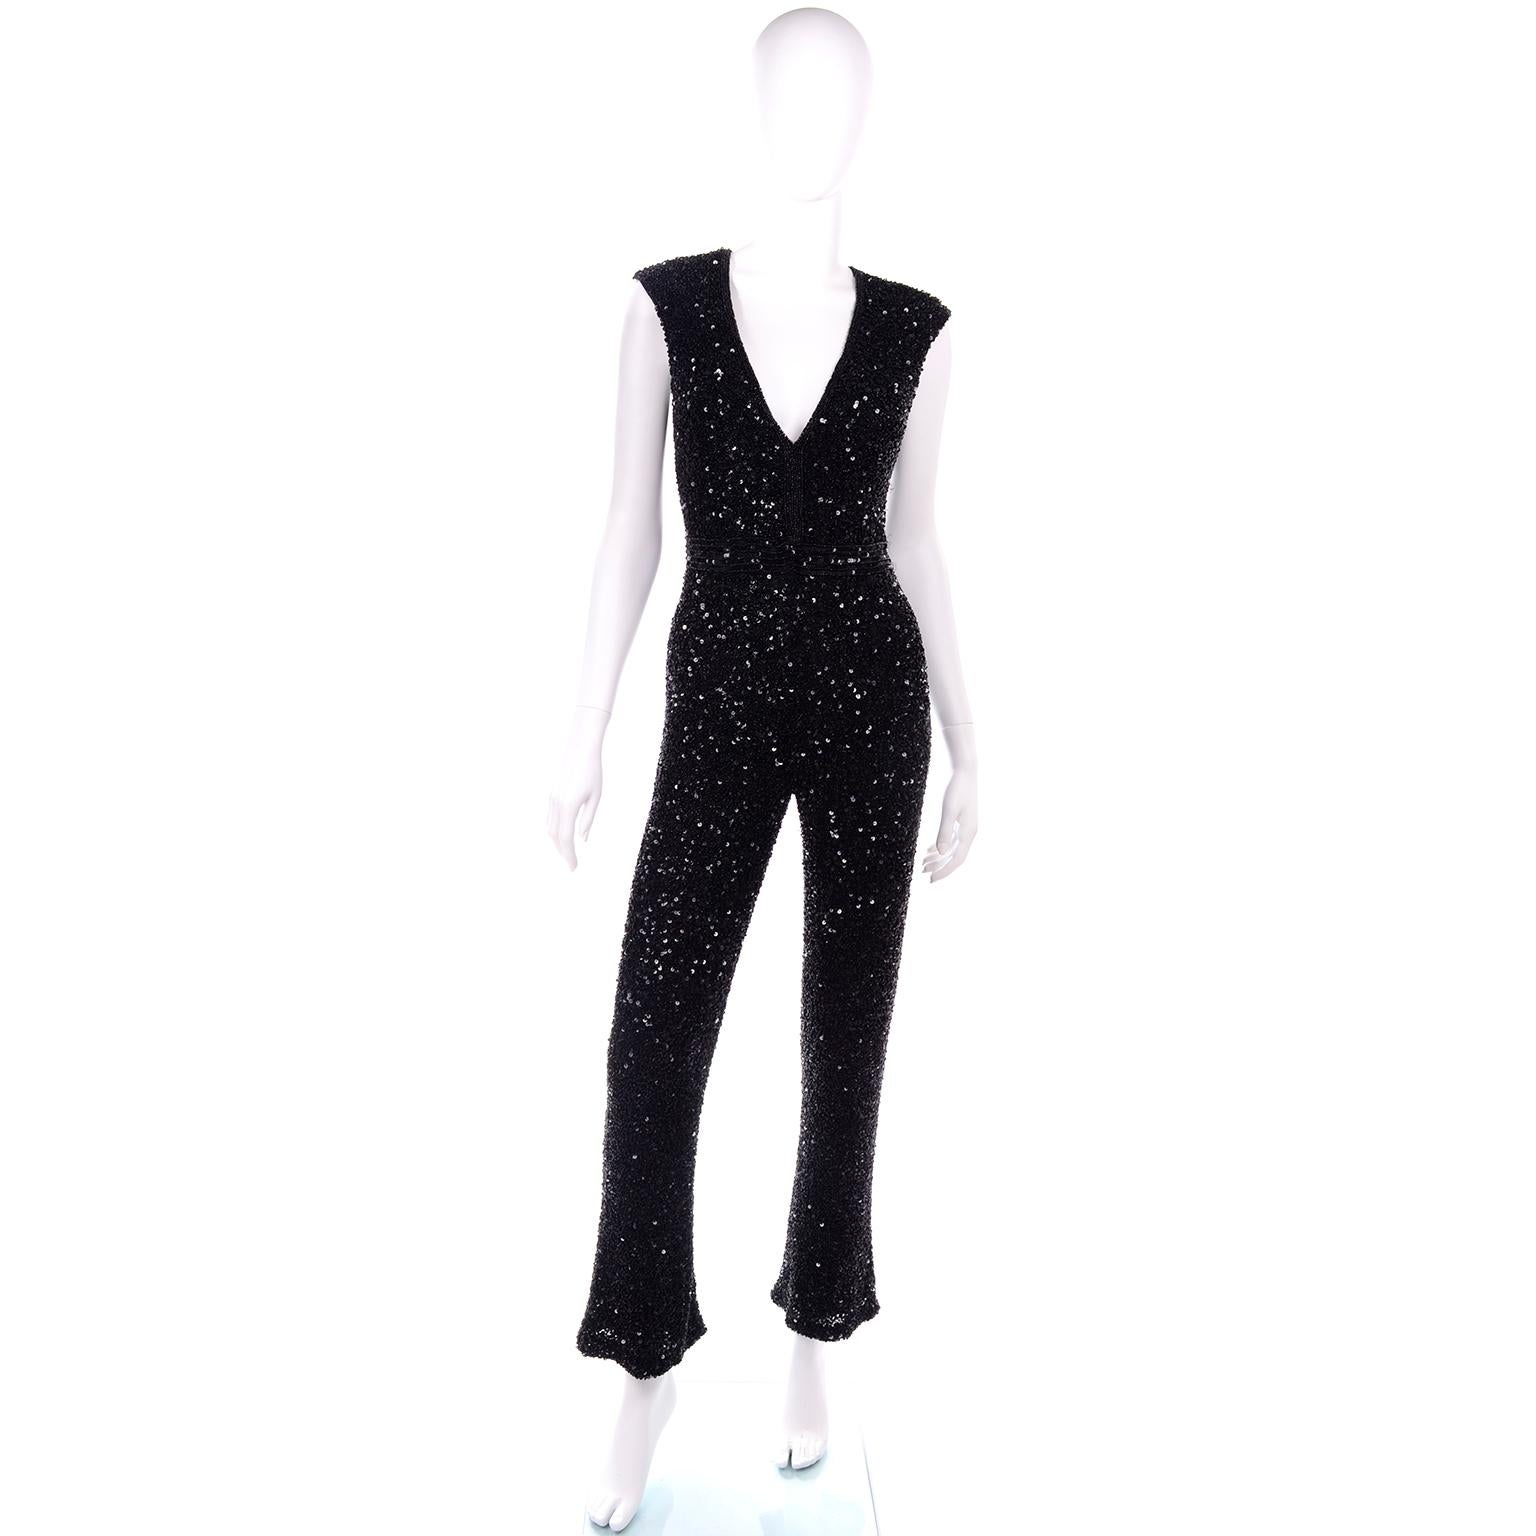 We are obsessed with this vintage sleeveless black evening jumpsuit! Photos can't even begin to show how spectacular this piece is and the sparkling beads and sequins are so beautiful! This would be a great evening dress alternative for any holiday